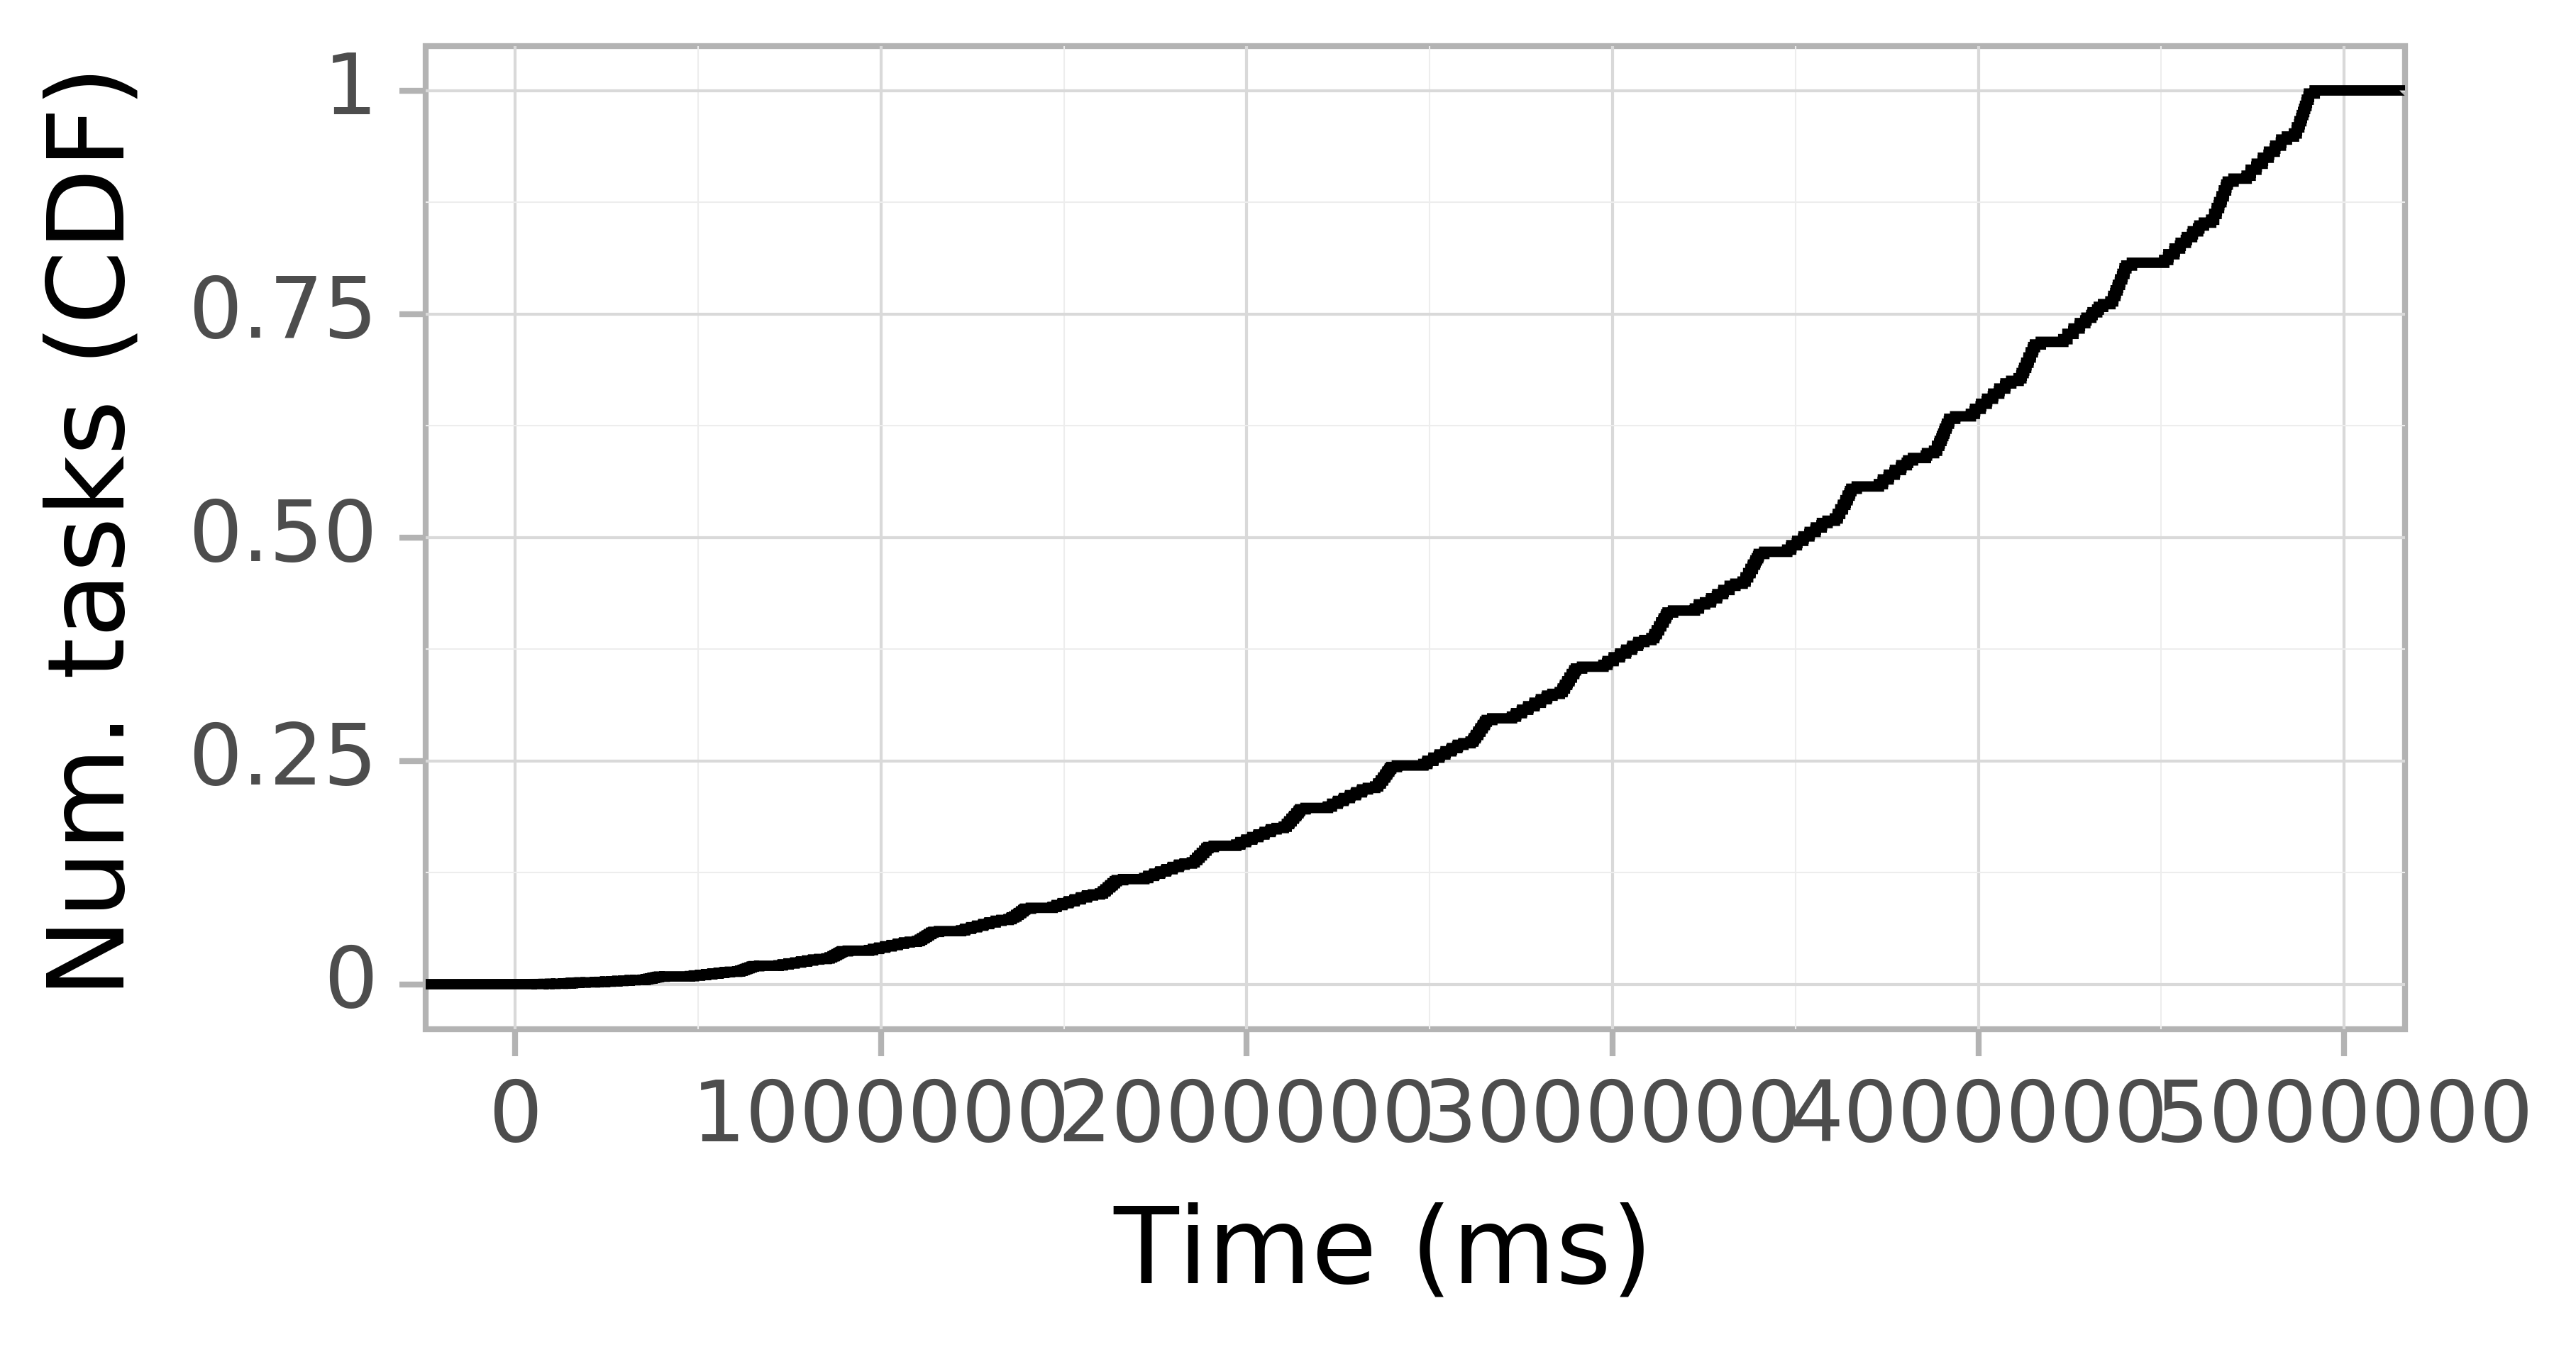 Task arrival CDF graph for the askalon-new_ee4 trace.